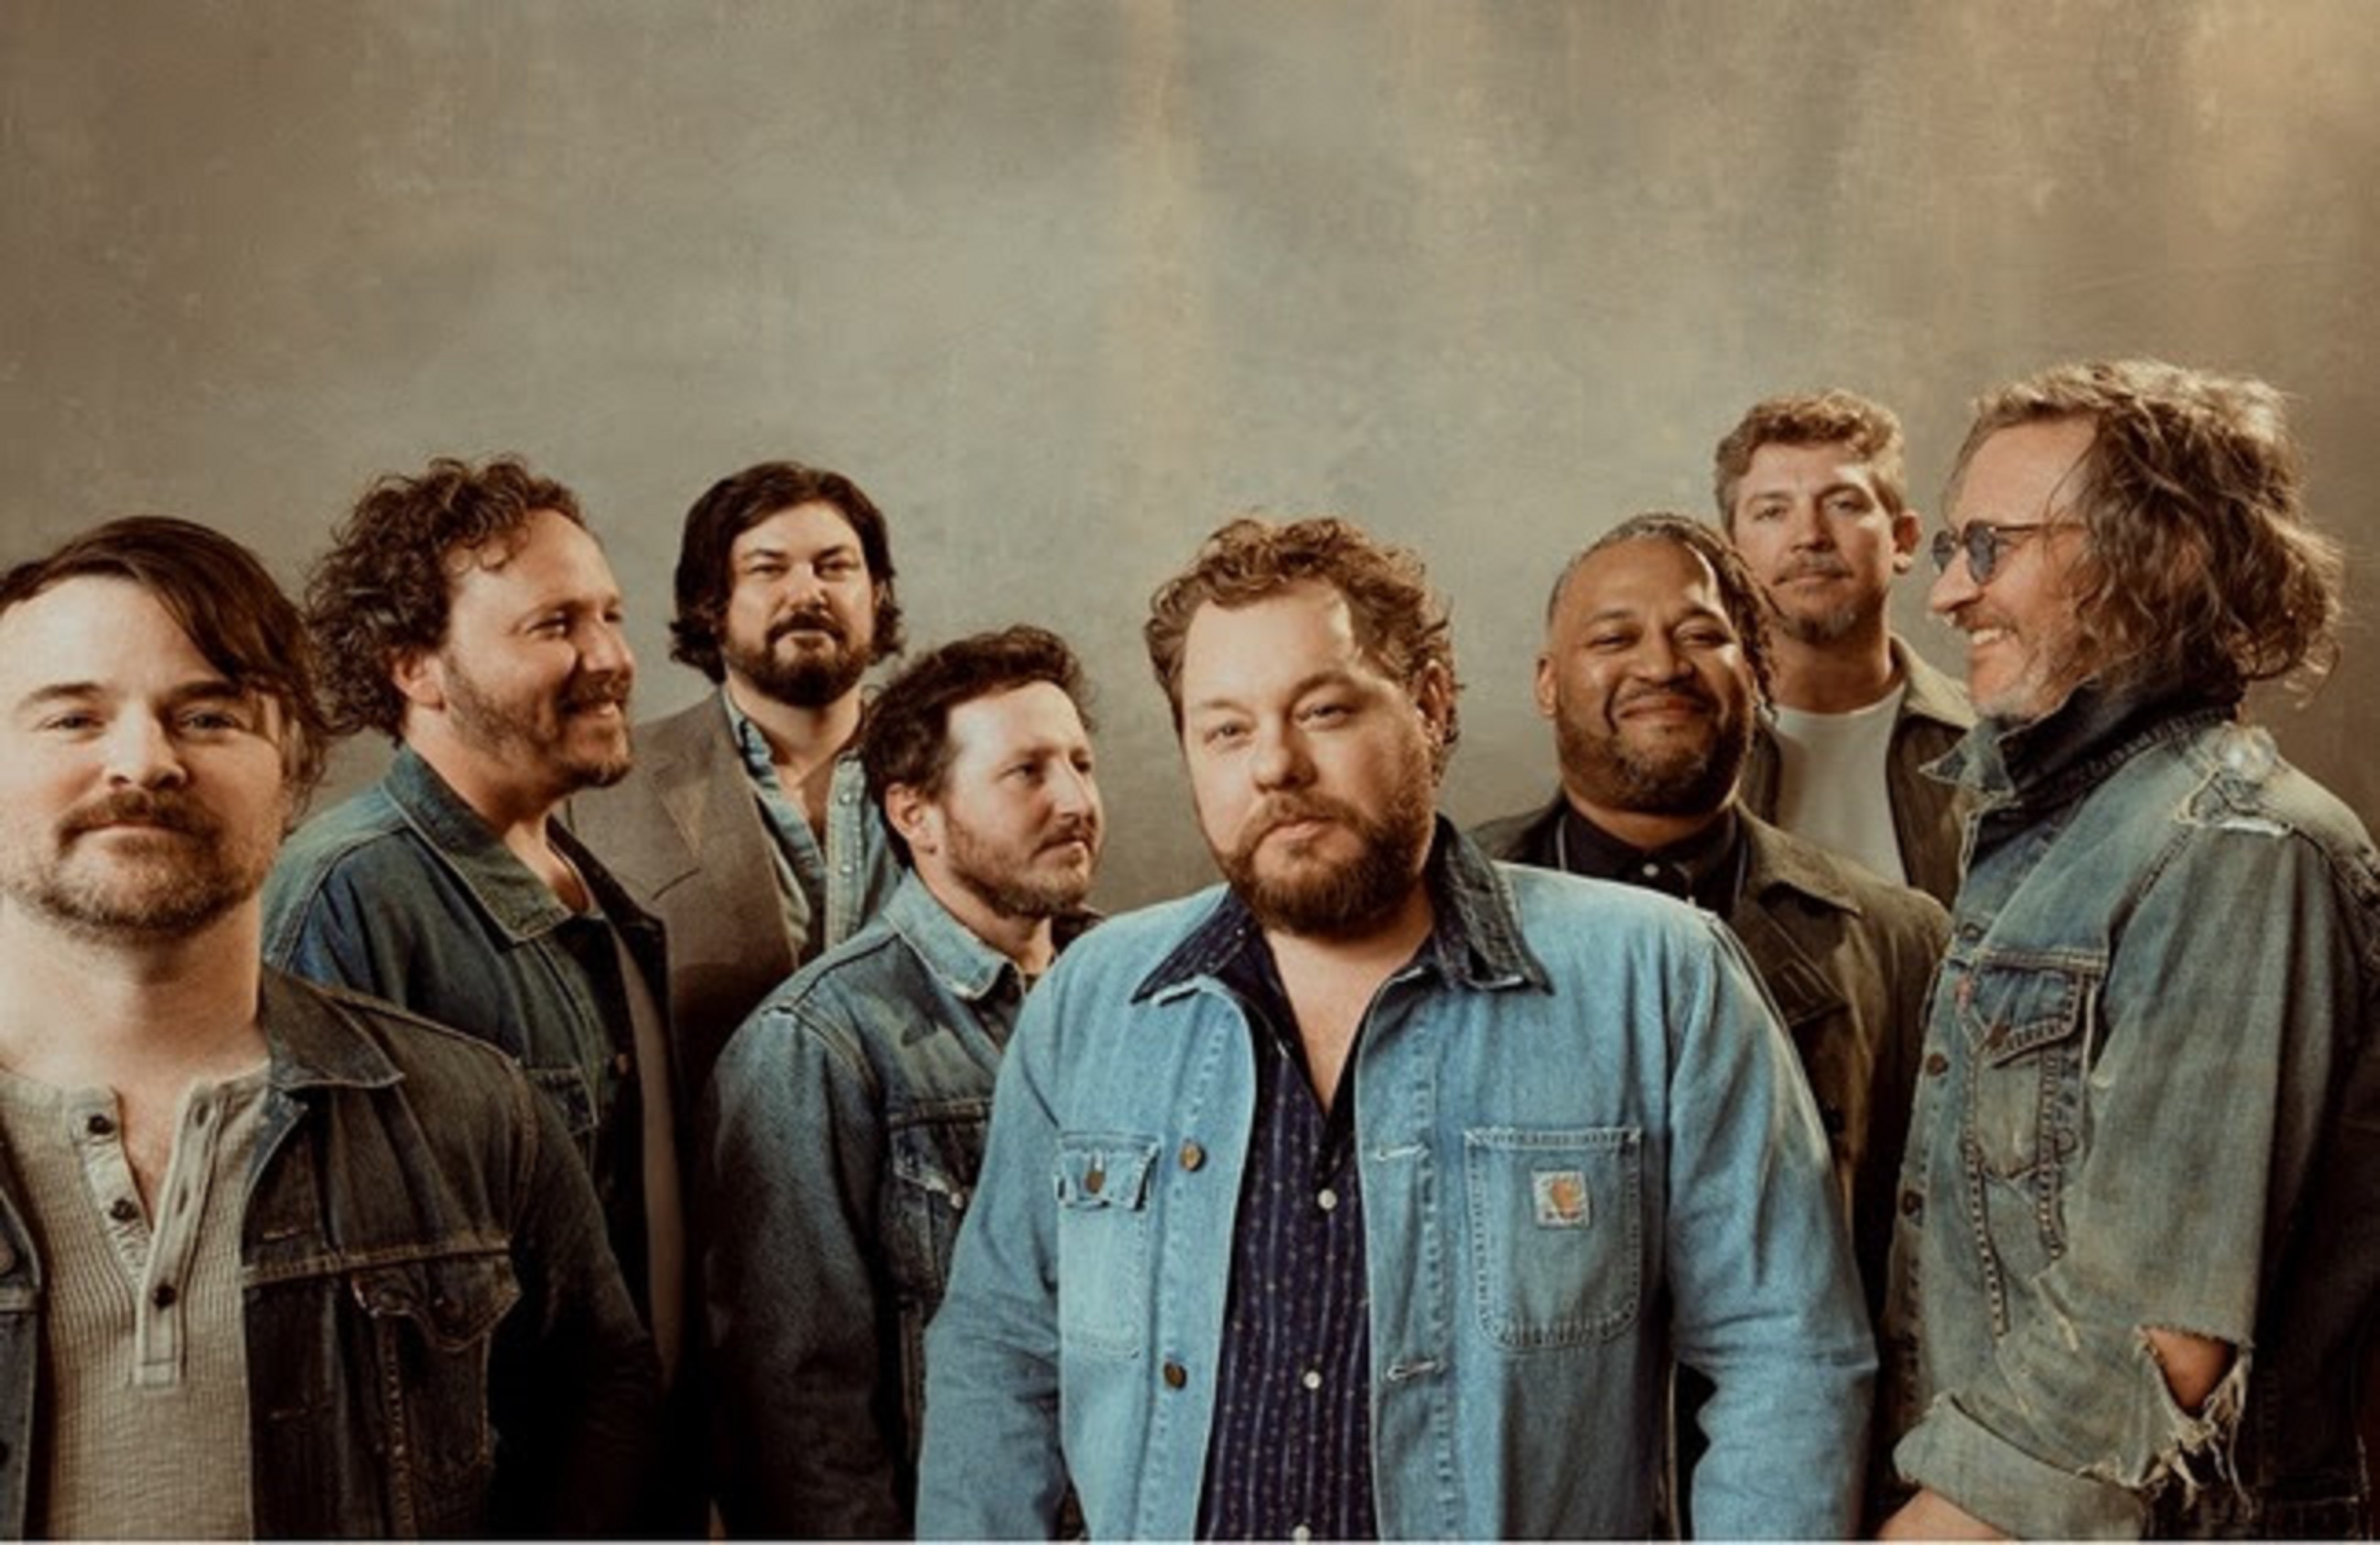 Nathaniel Rateliff & The Night Sweats unveil new single “David and Goliath," new album, "South of Here" out June 28